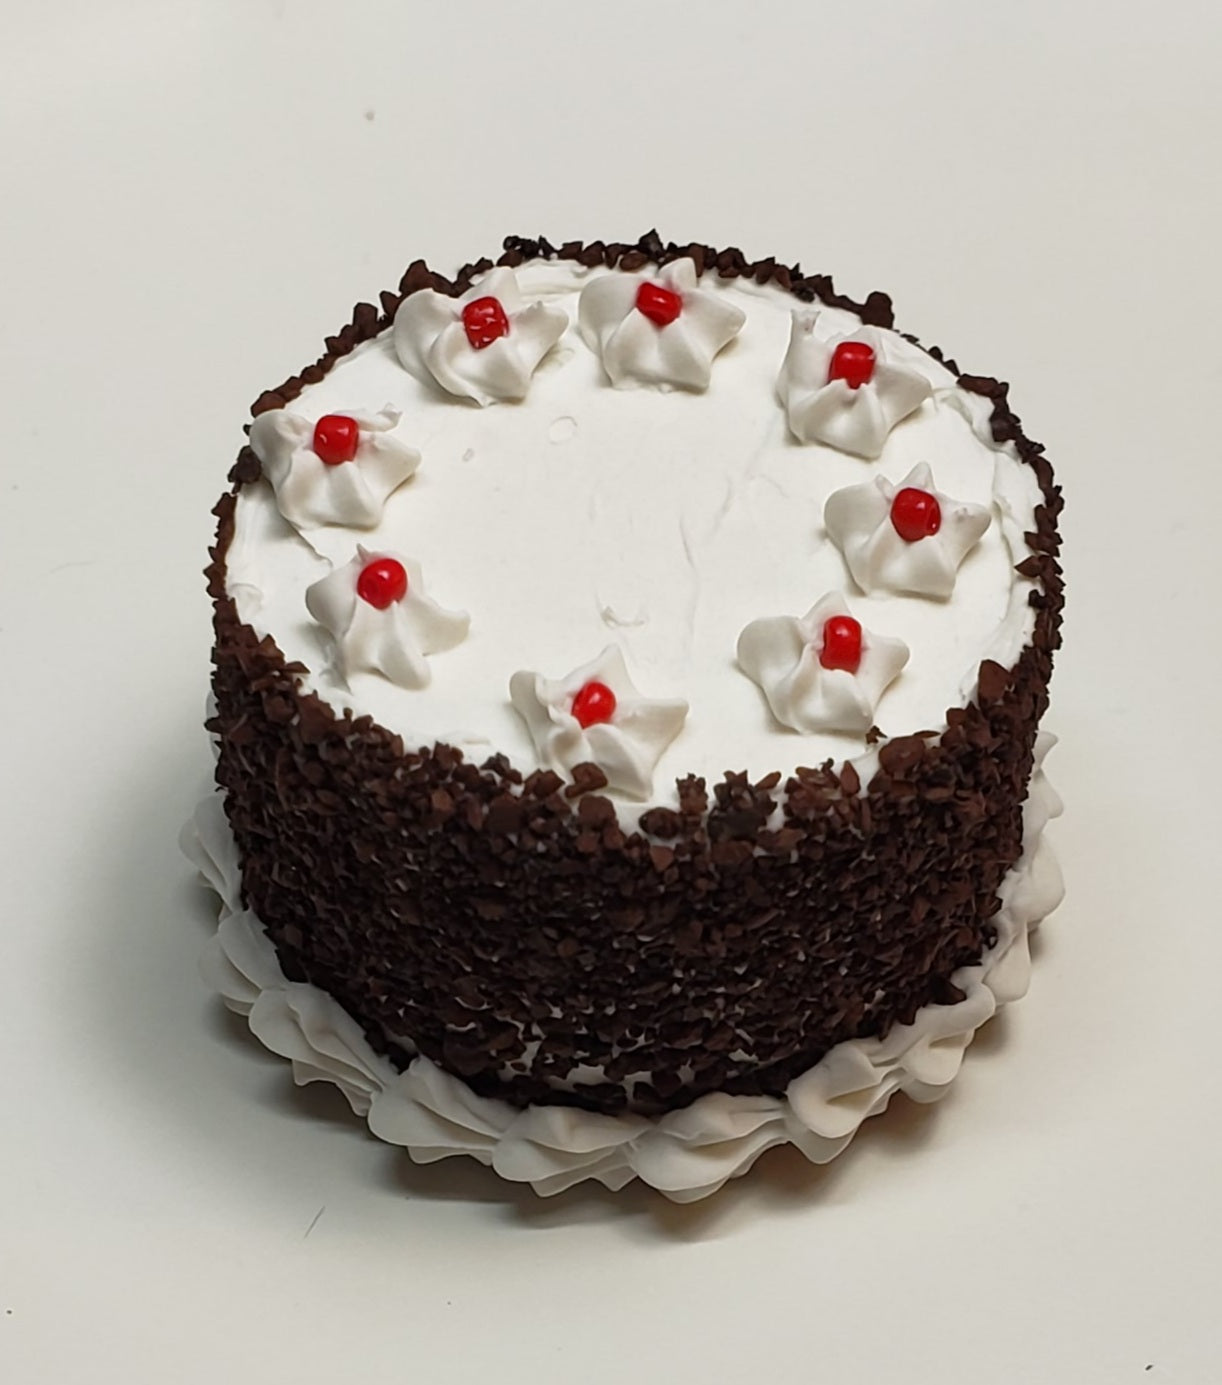 1.5 in black forest cake